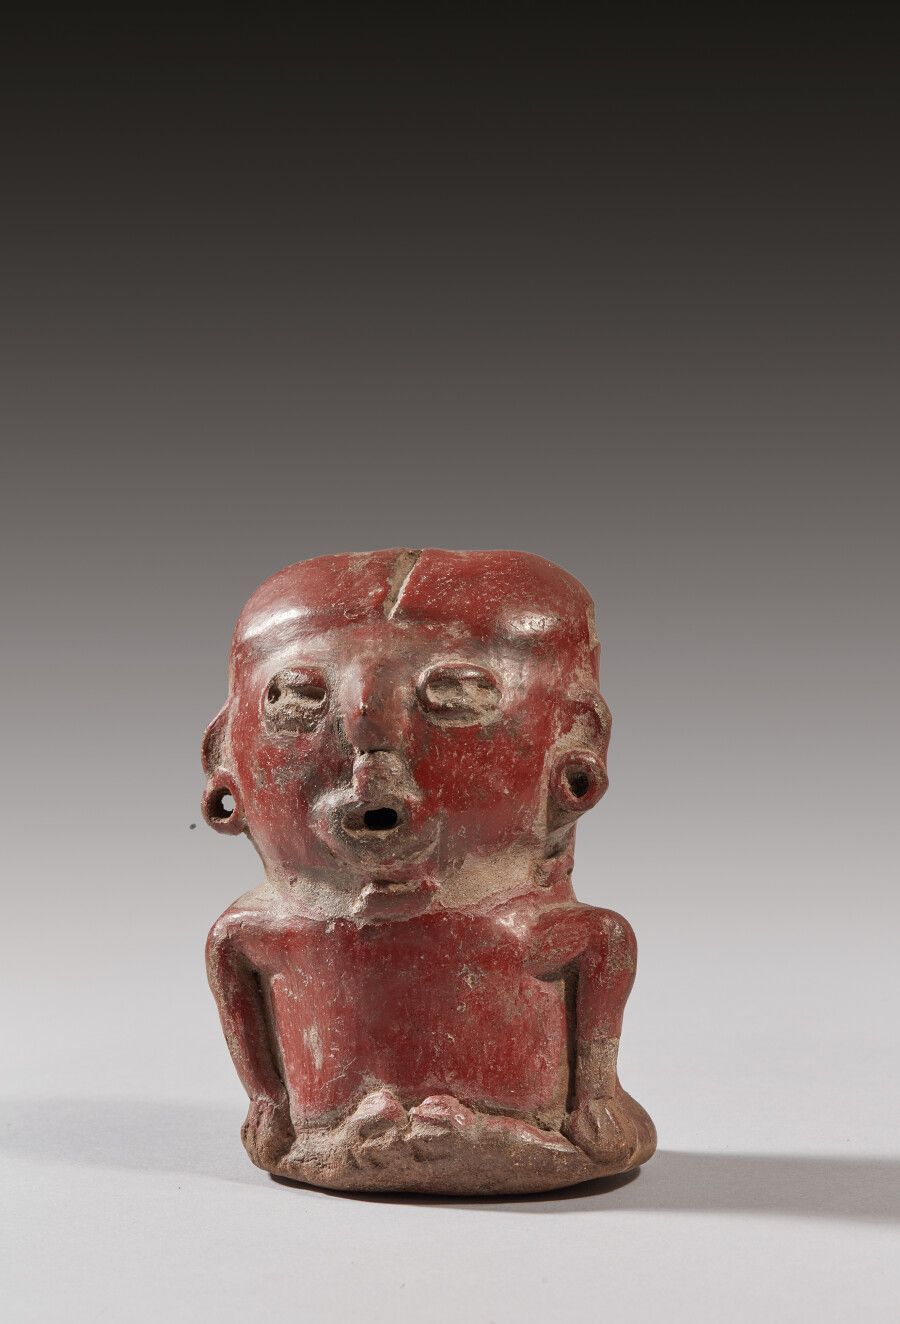 Null Seated figure

Brown clay with red slip

Chupicuaro culture, Mexico

900-10&hellip;